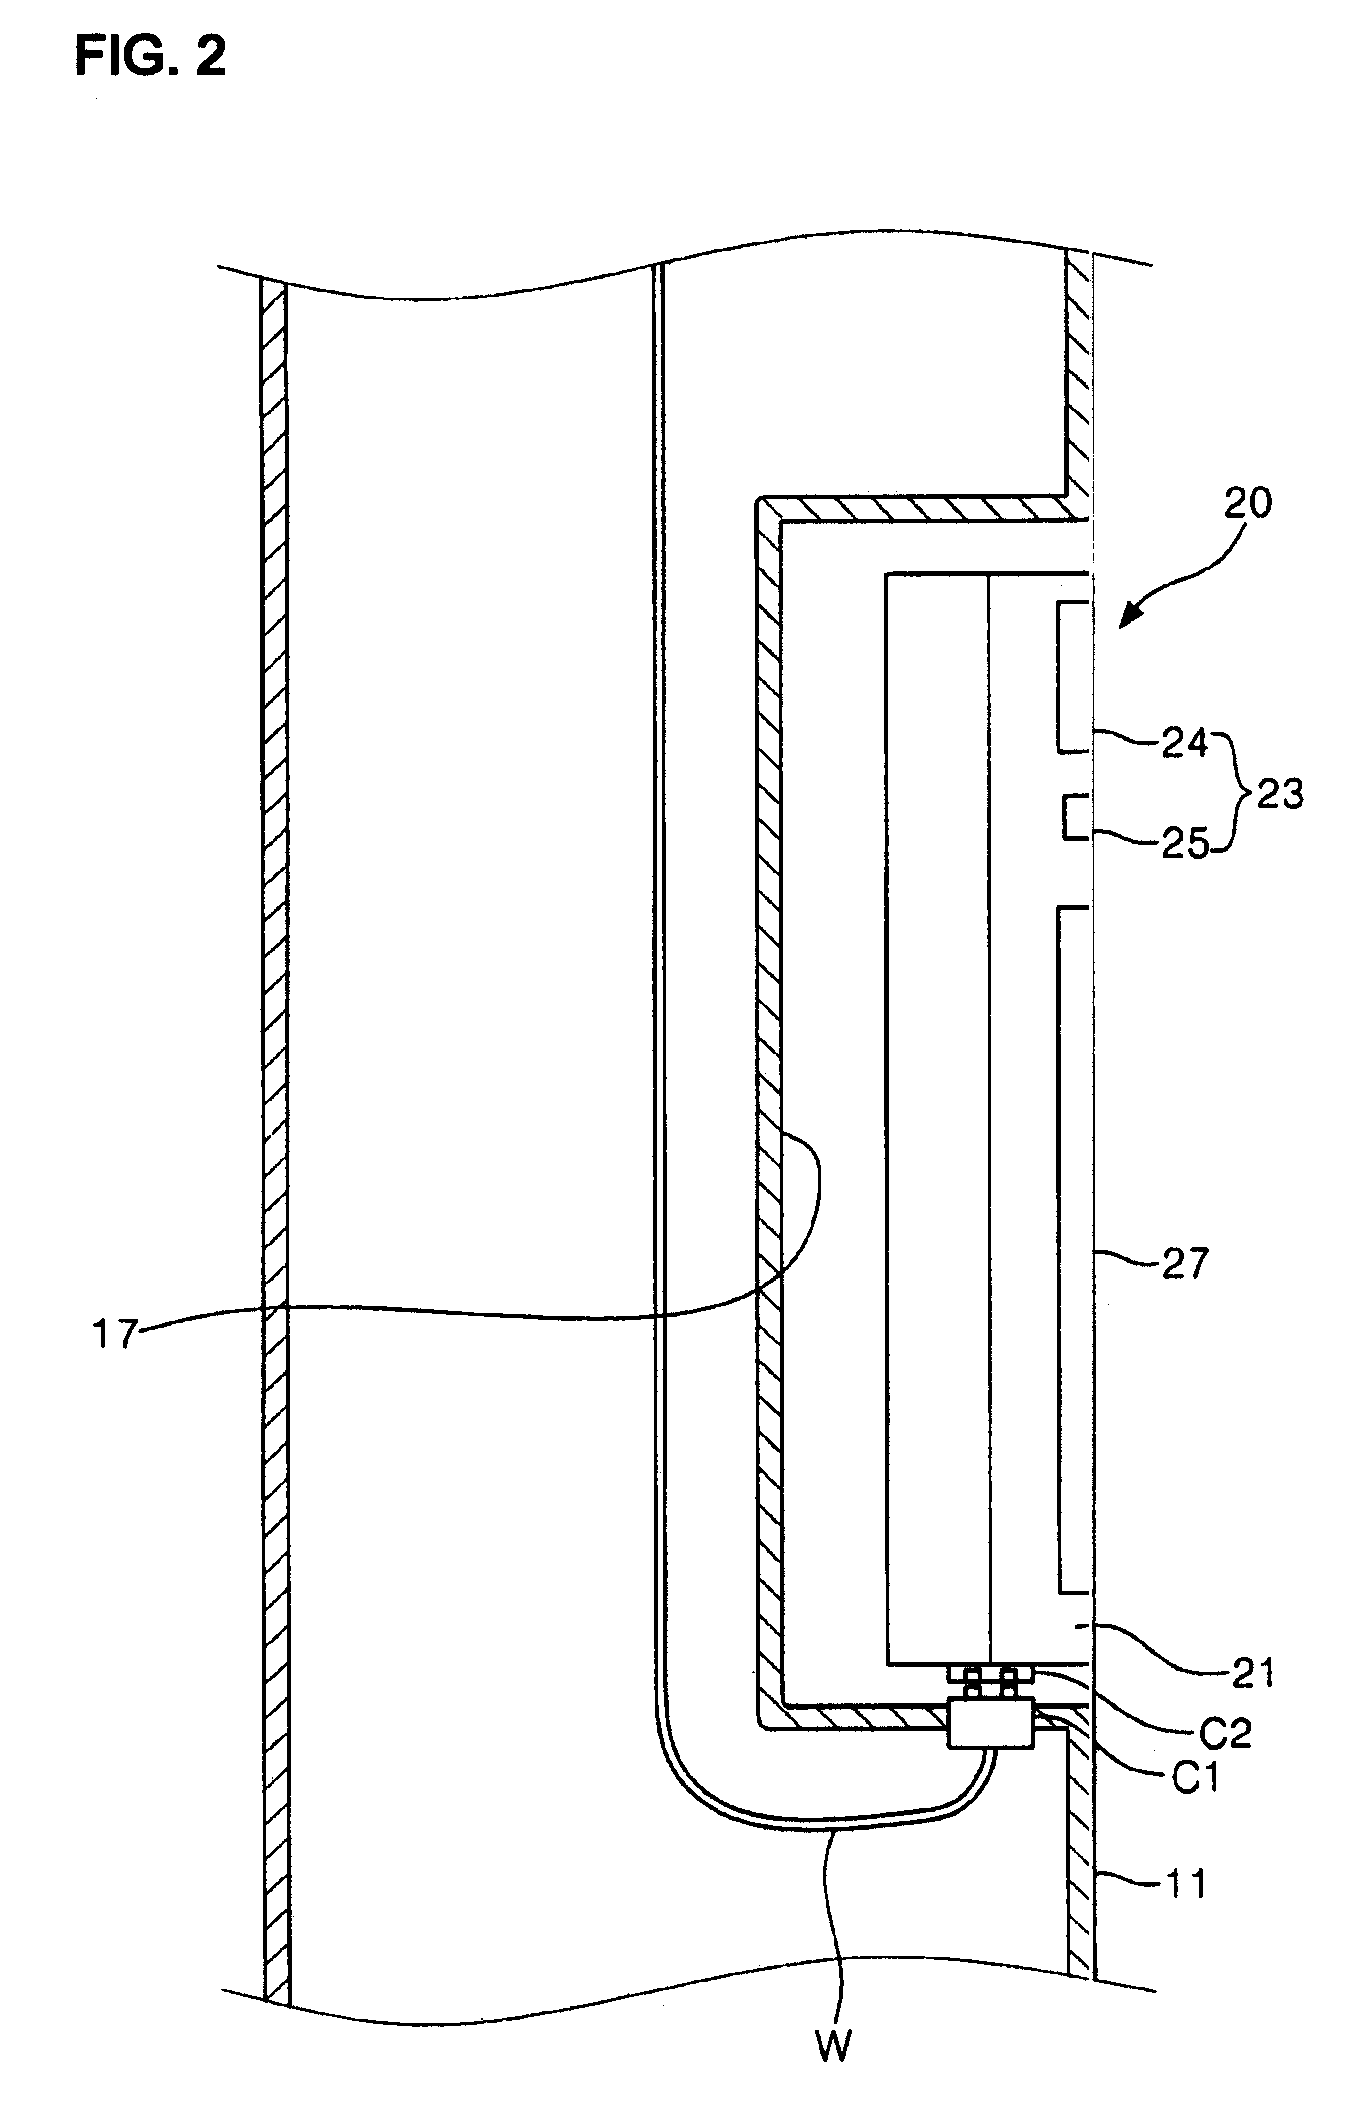 Mounting structure for display unit in refrigerator